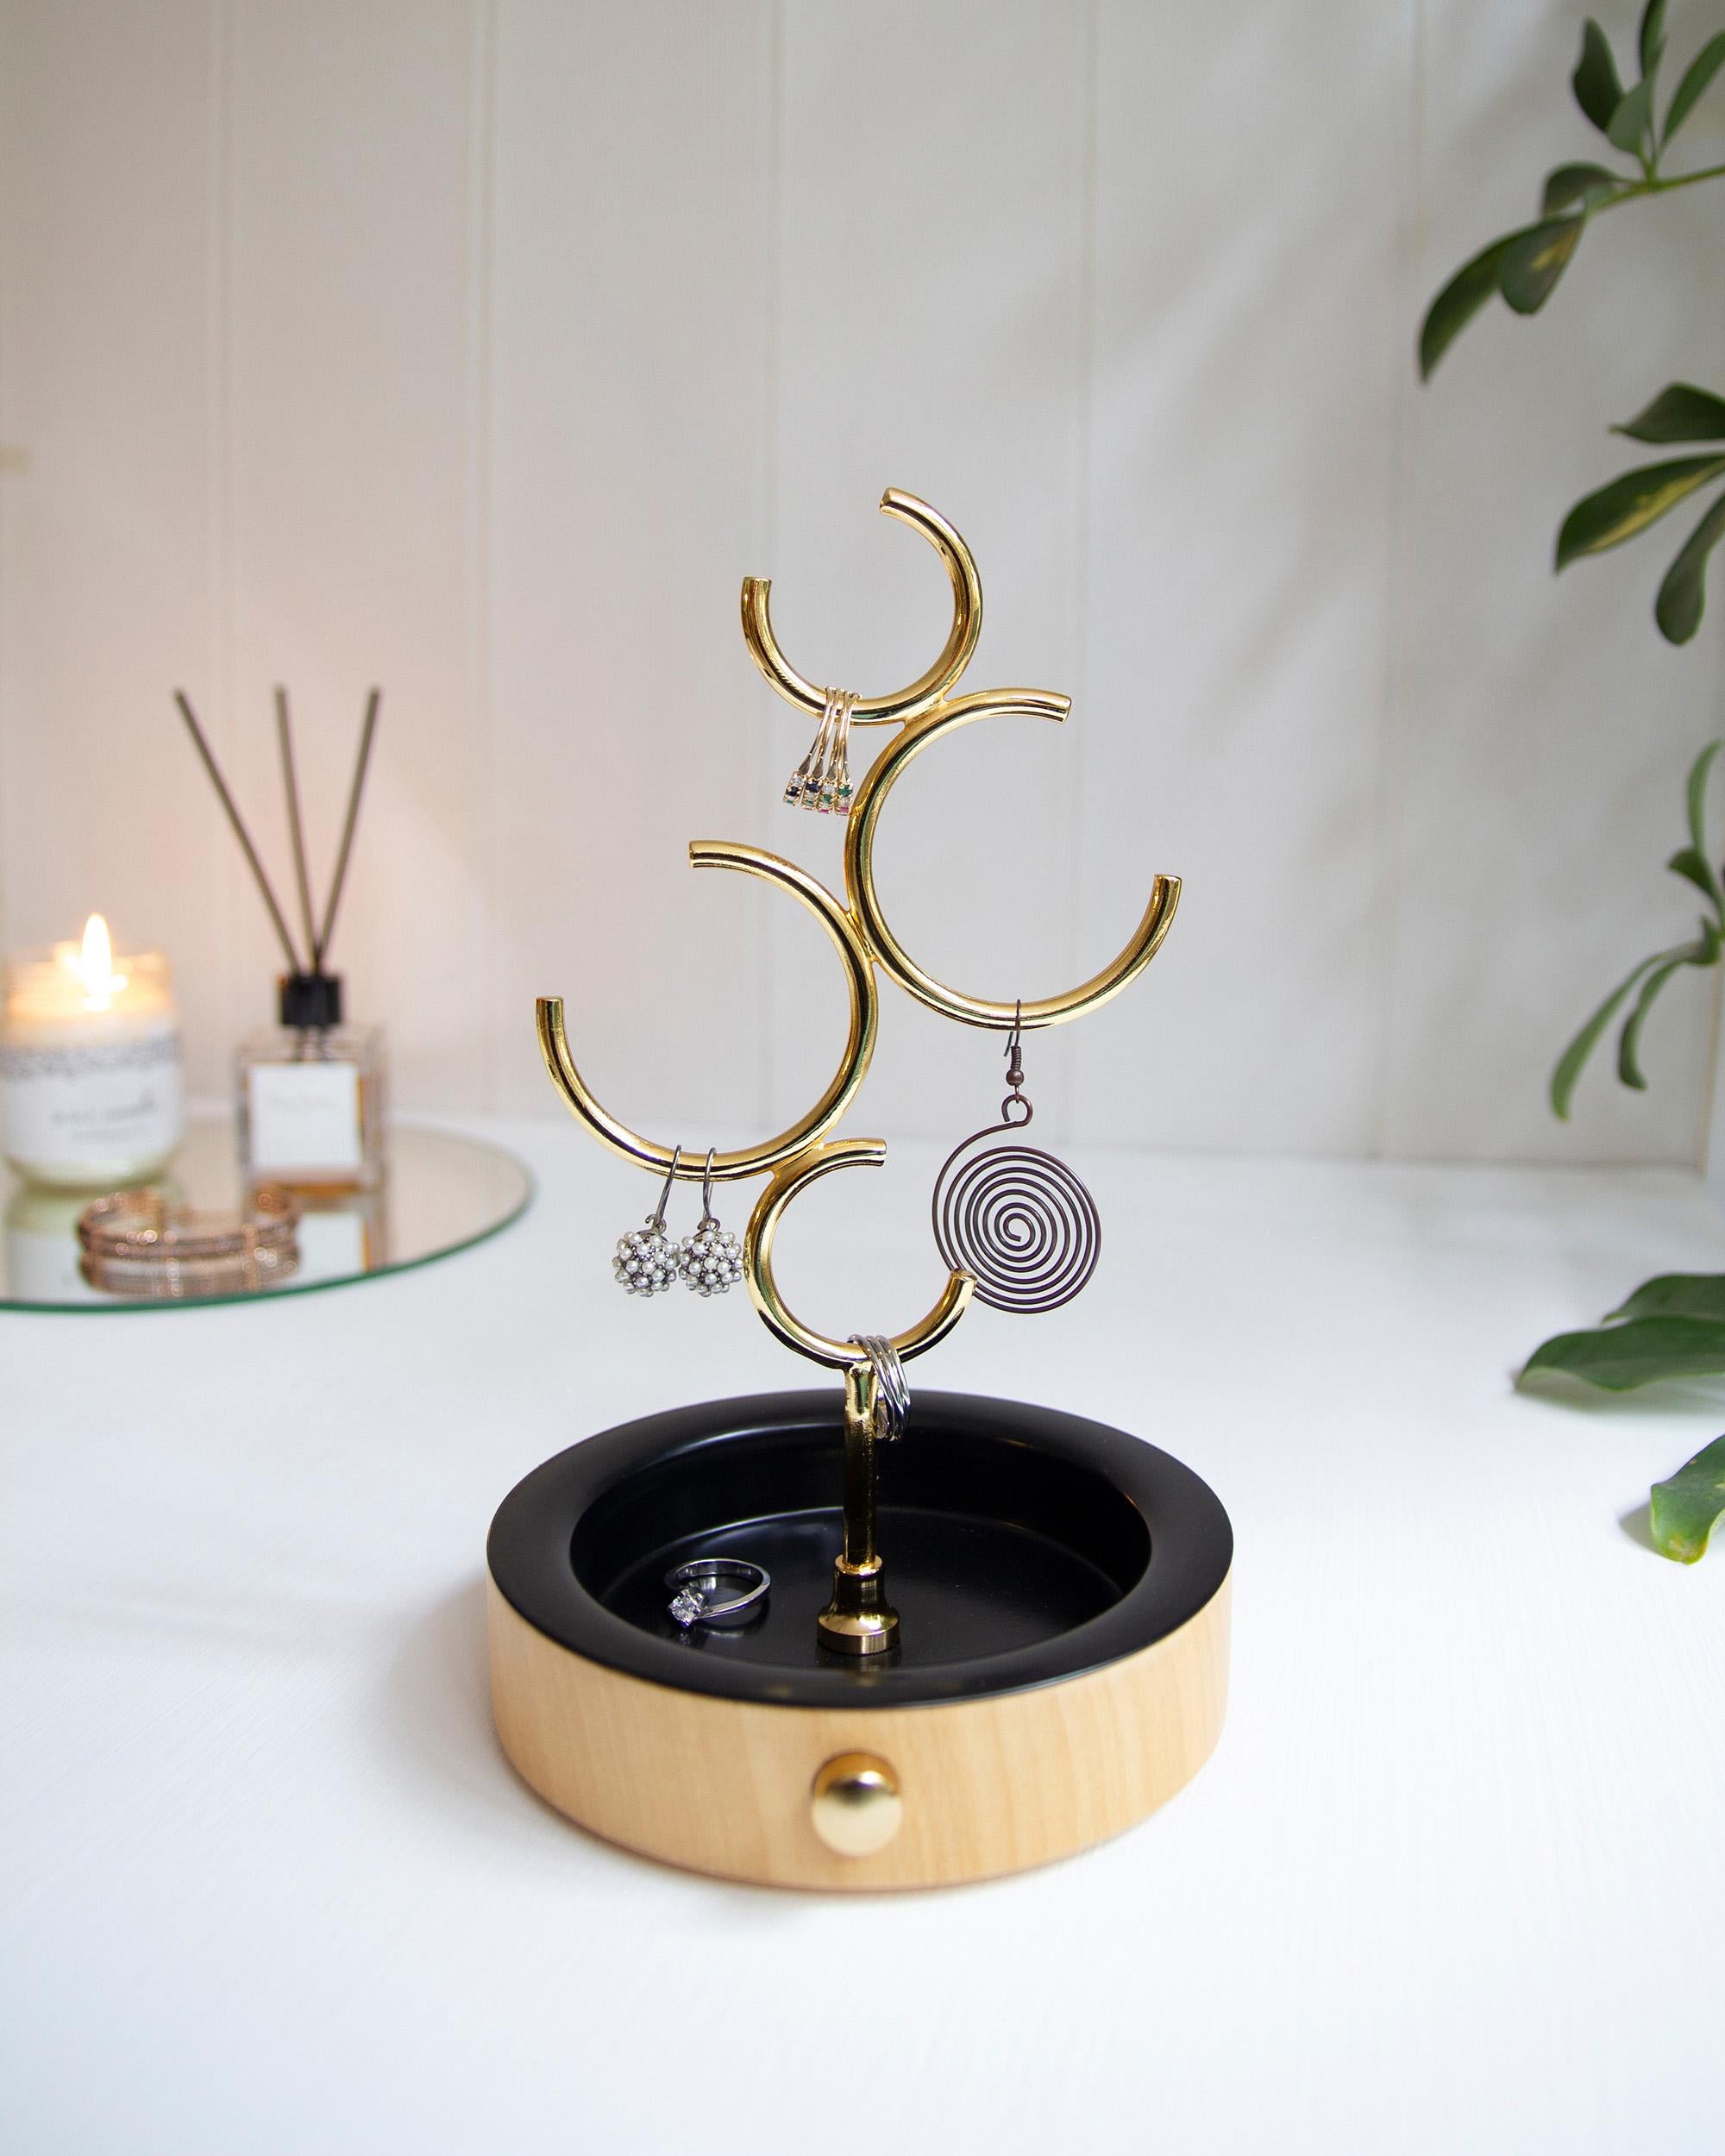 Materials: Metal with static paint and polished gold finish, Wood
Dimensions: 13 × 13 × 22 cm
Care Instructions: Wipe with a dry cloth when needed.

Hoop is inspired by one of the oldest tricks in the history of illusion; 